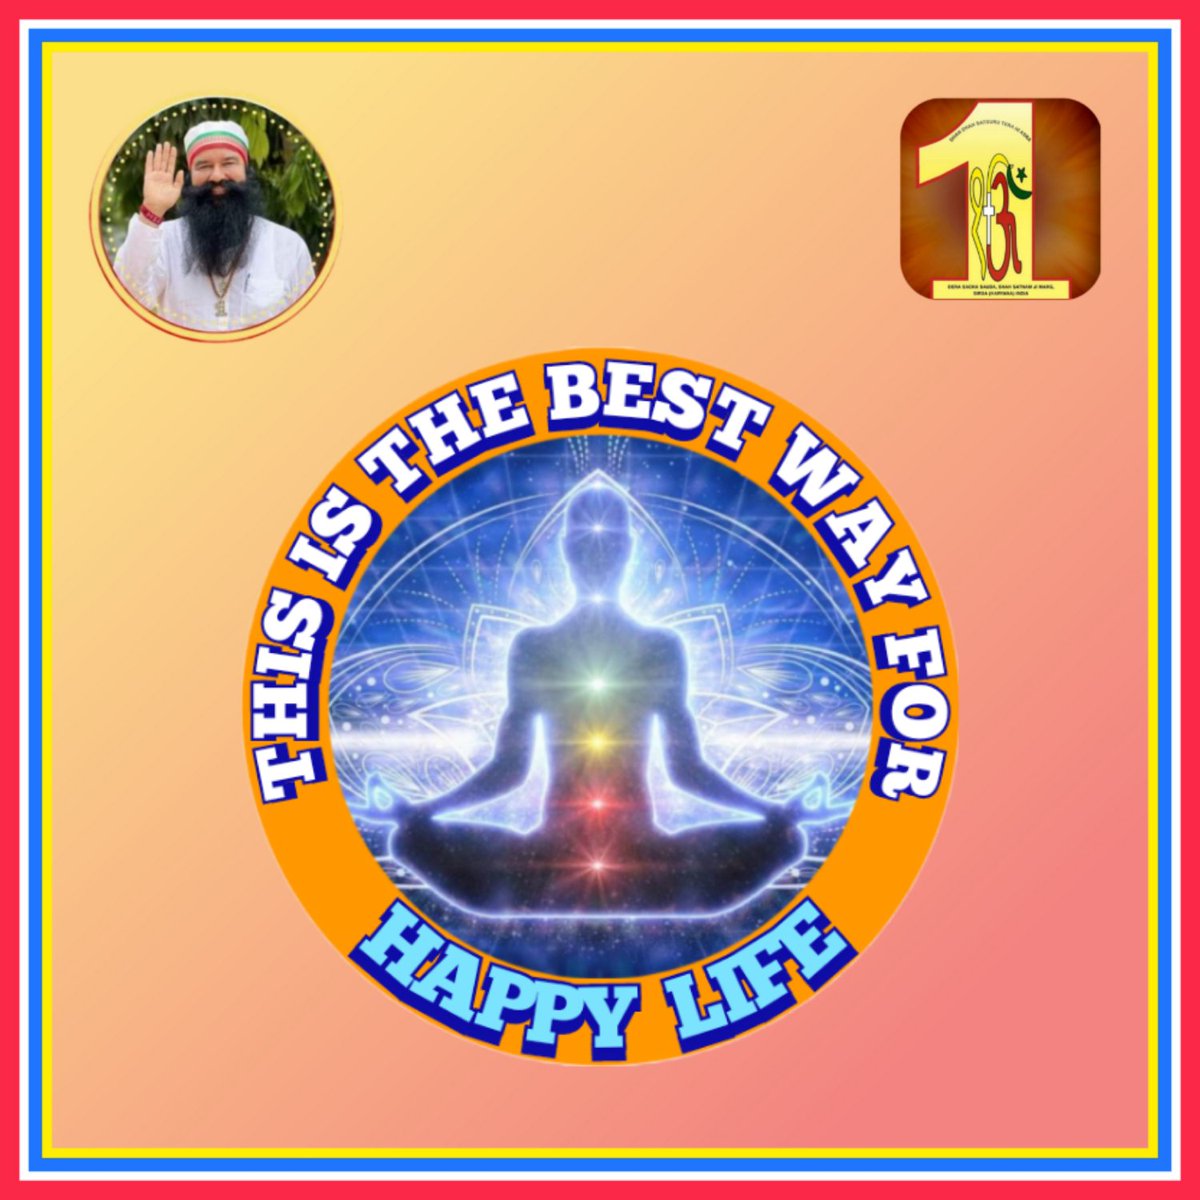 Doing meditation regularly as per the method is the #HappinessMantra.
#KeyToHappiness
#MethodOfMeditation #Meditation 
#MeditationMantra 
#DeraSachaSauda 
#SaintDrMSG